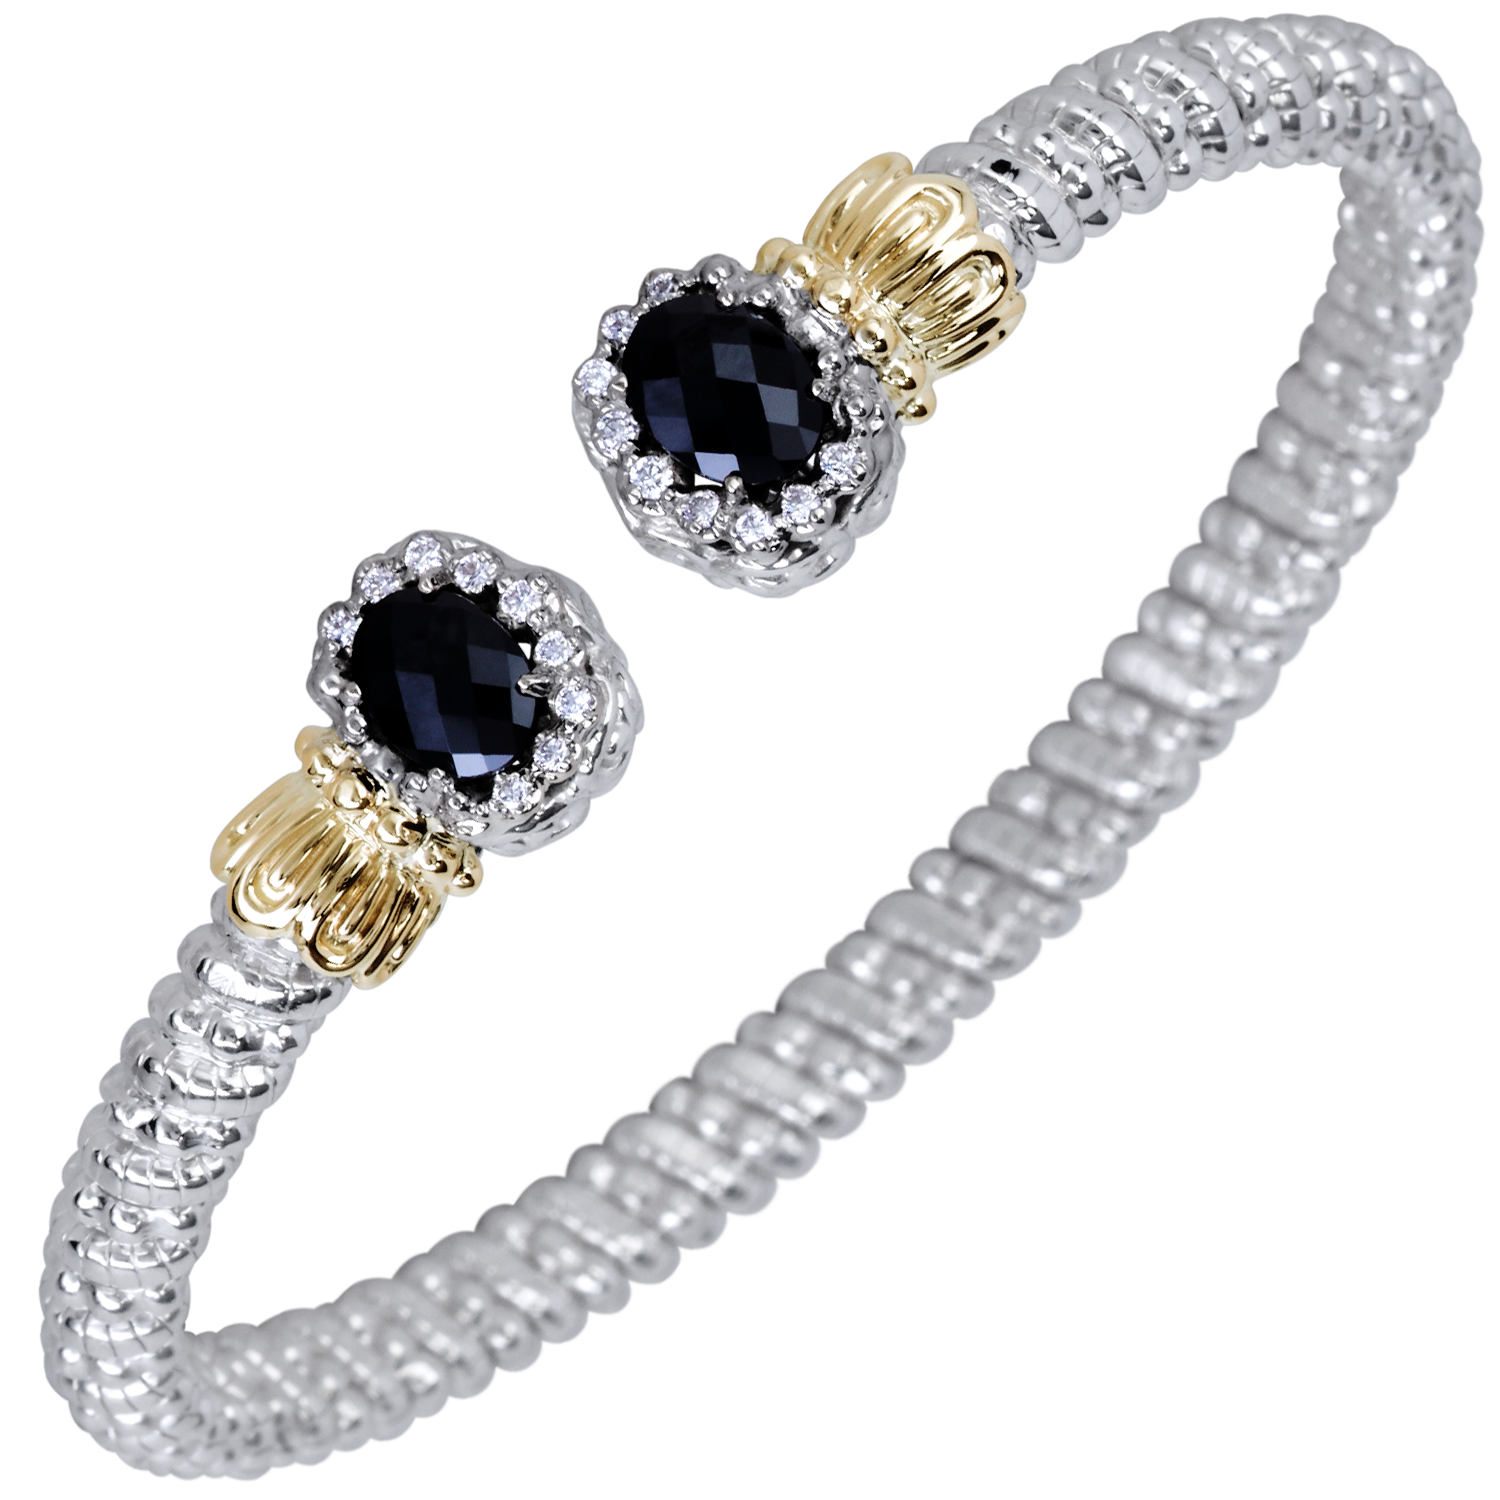 Vahan Halo Sterling Silver & Yellow Gold Gemstone Bracelet Galloway and Moseley, Inc. Sumter, SC